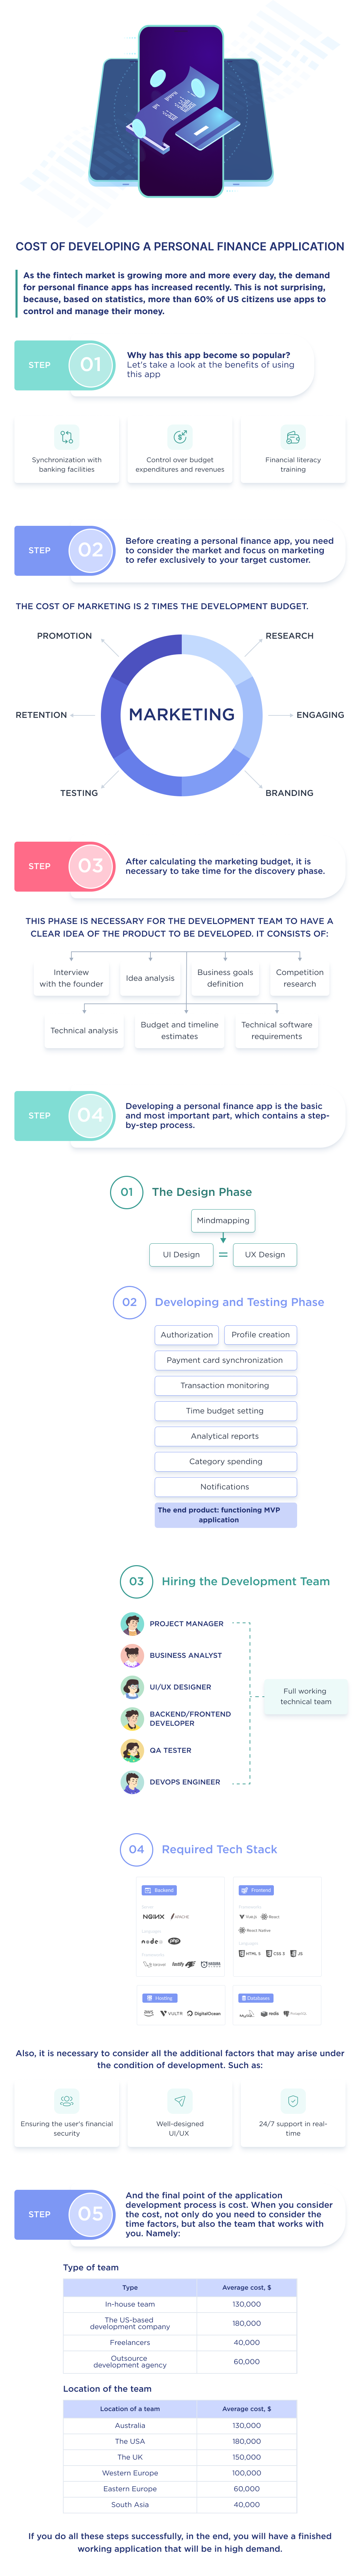 This infographic shows a step-by-step process to help develop a personal finance app and calculate the cost of design and development